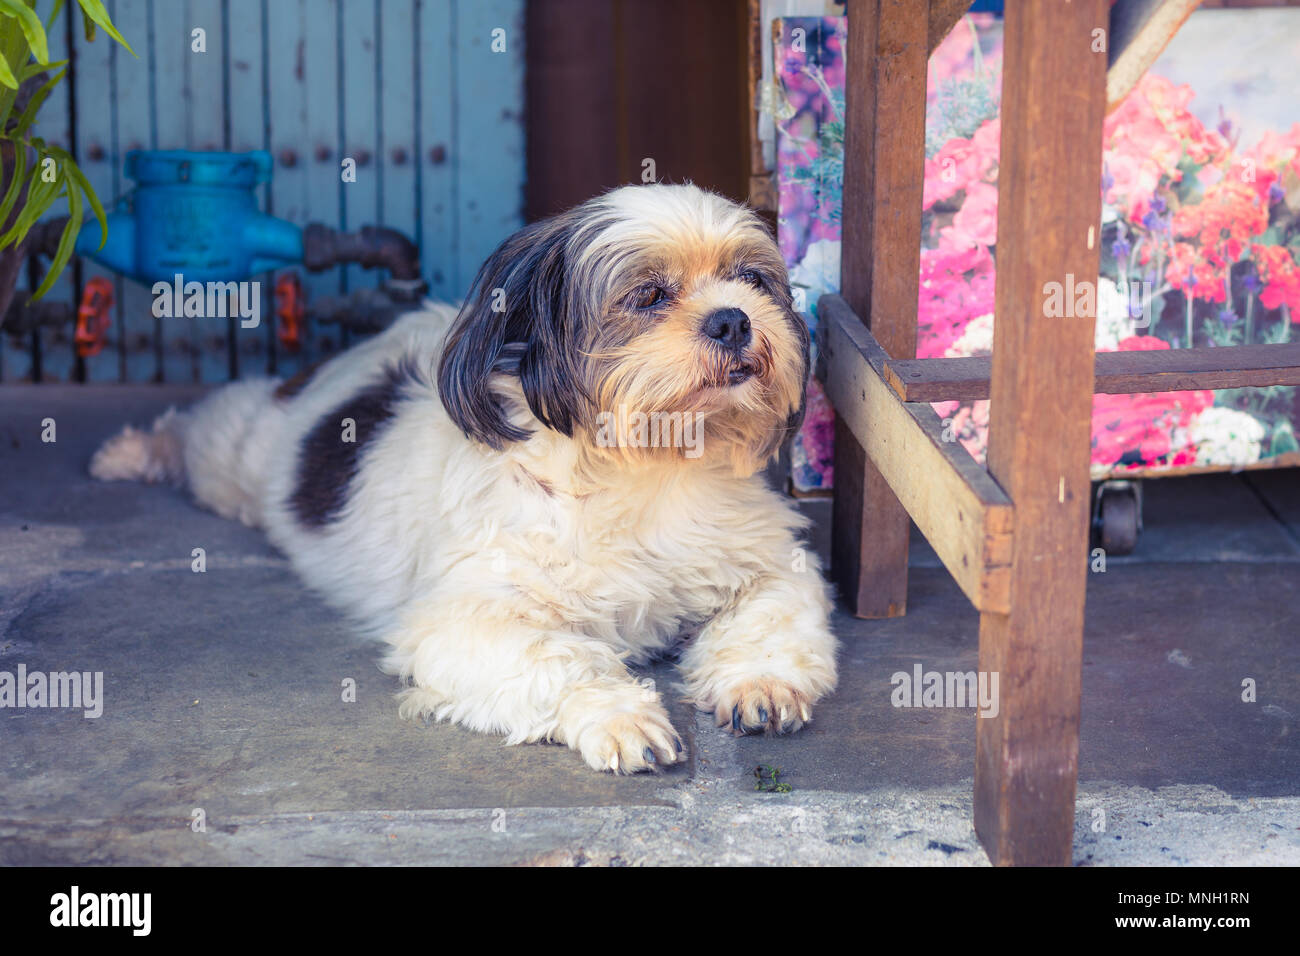 cute old dog lying dawn in the street during day Stock Photo